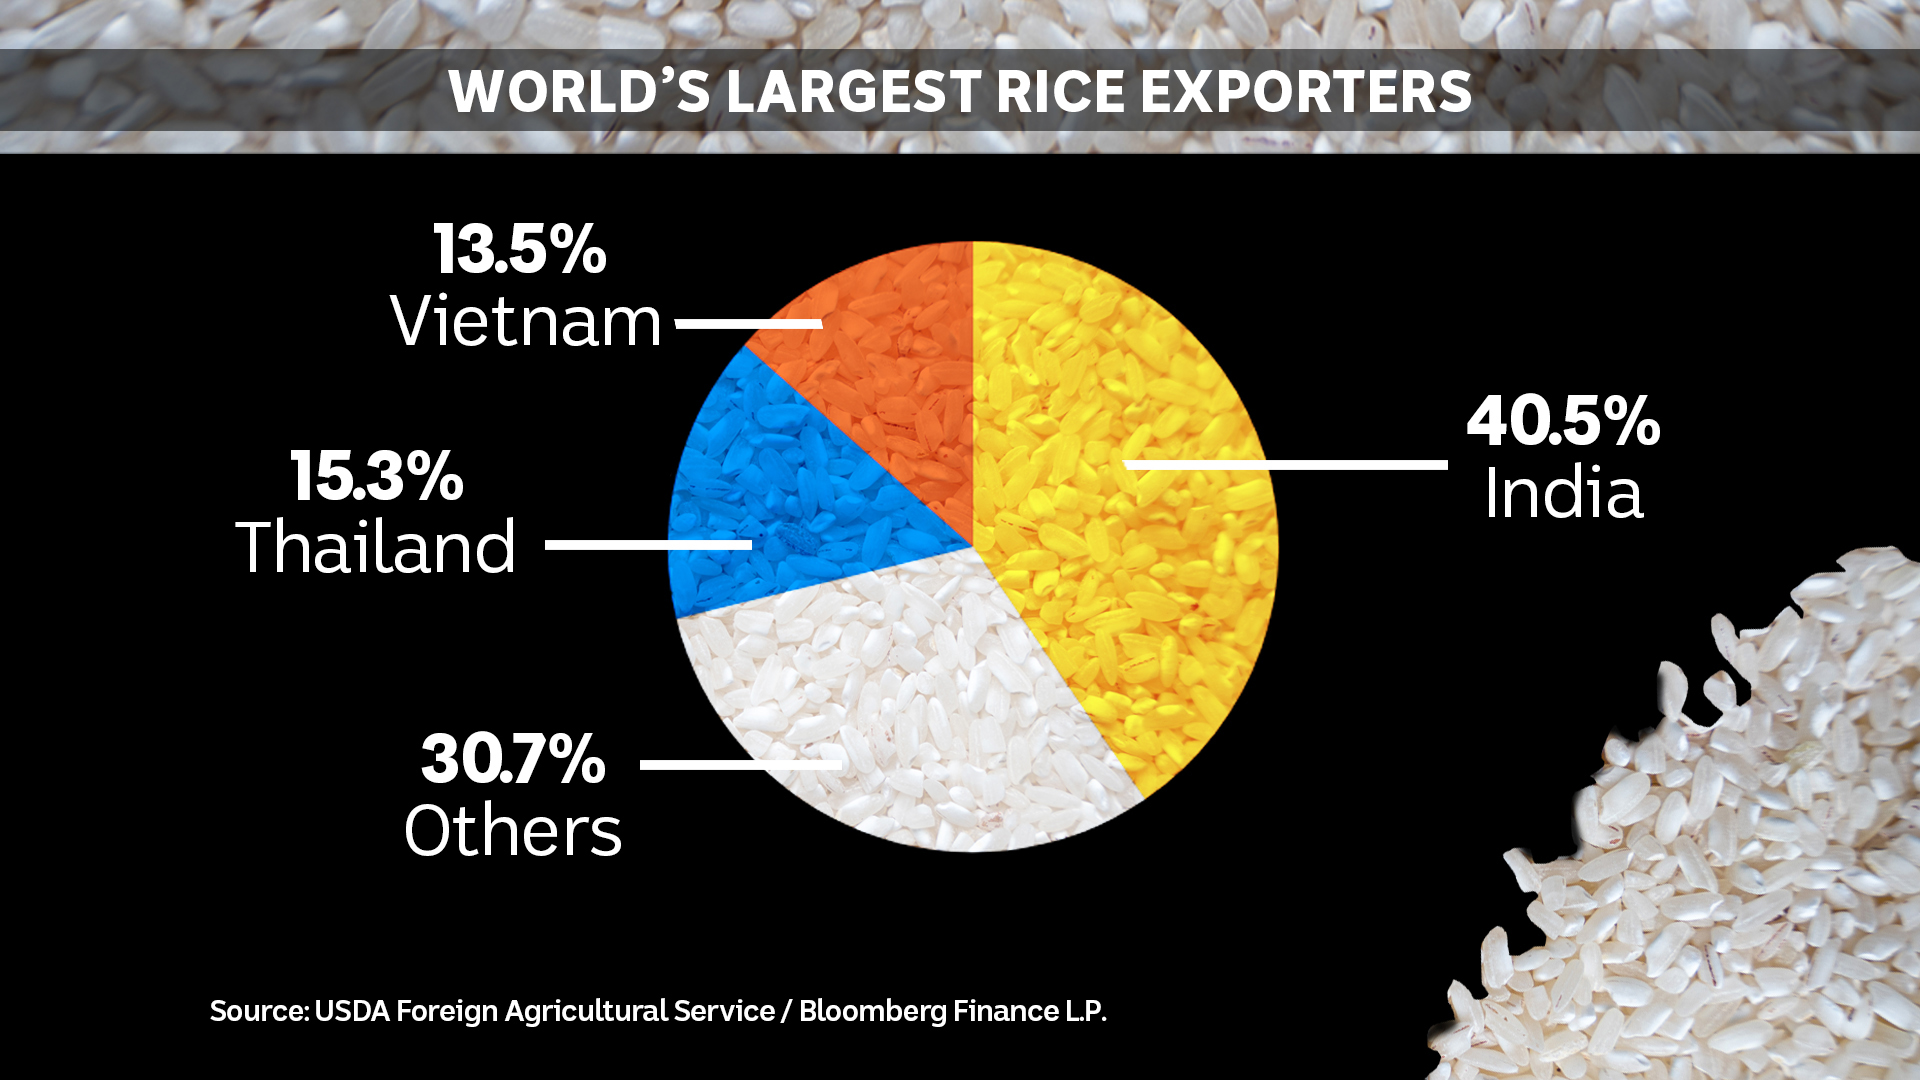 a pie chart shows indian rice exports taking up 40 per cent the pie, the largest chunk